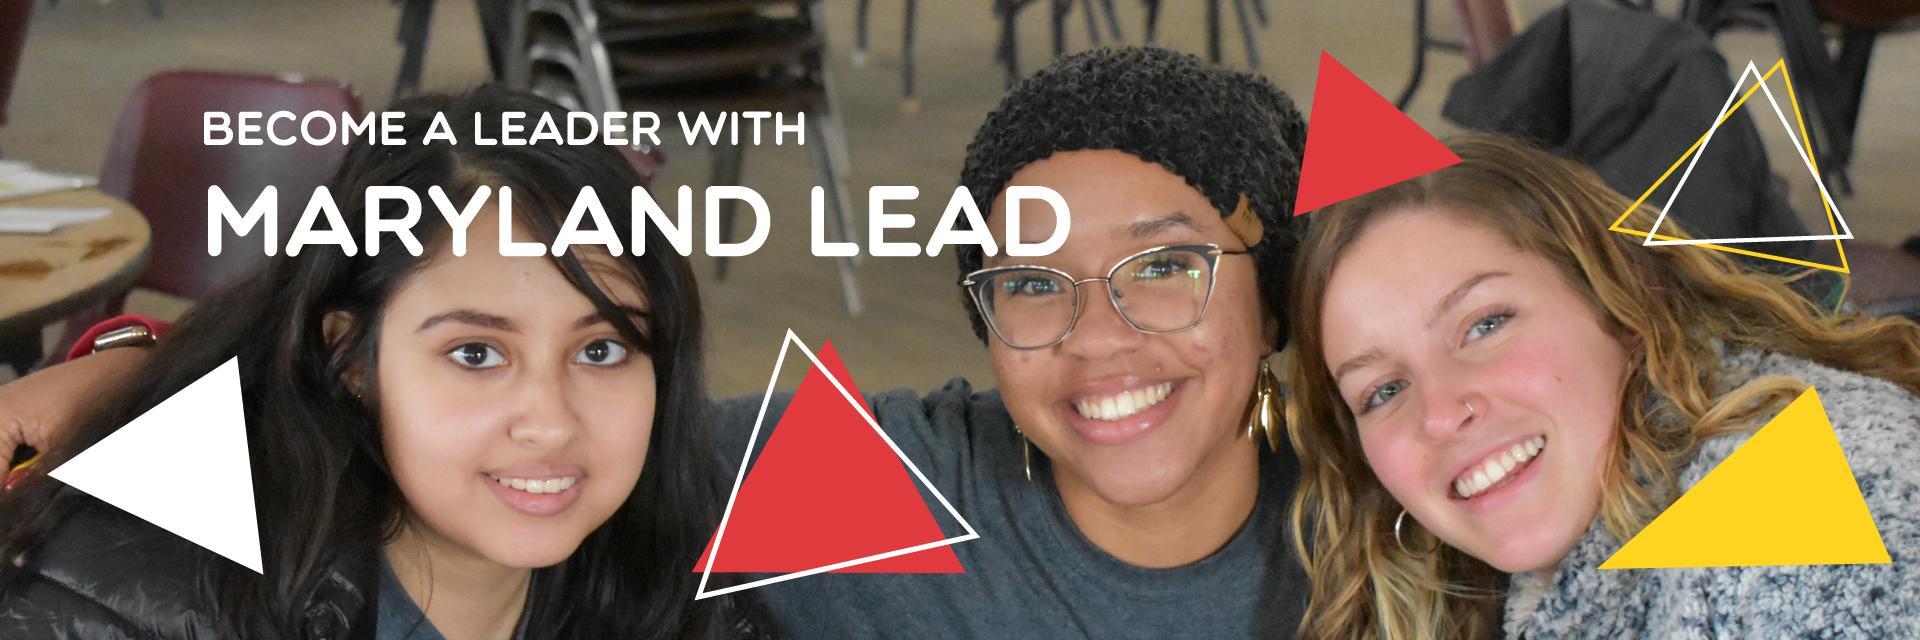 become a leader with Maryland LEAD